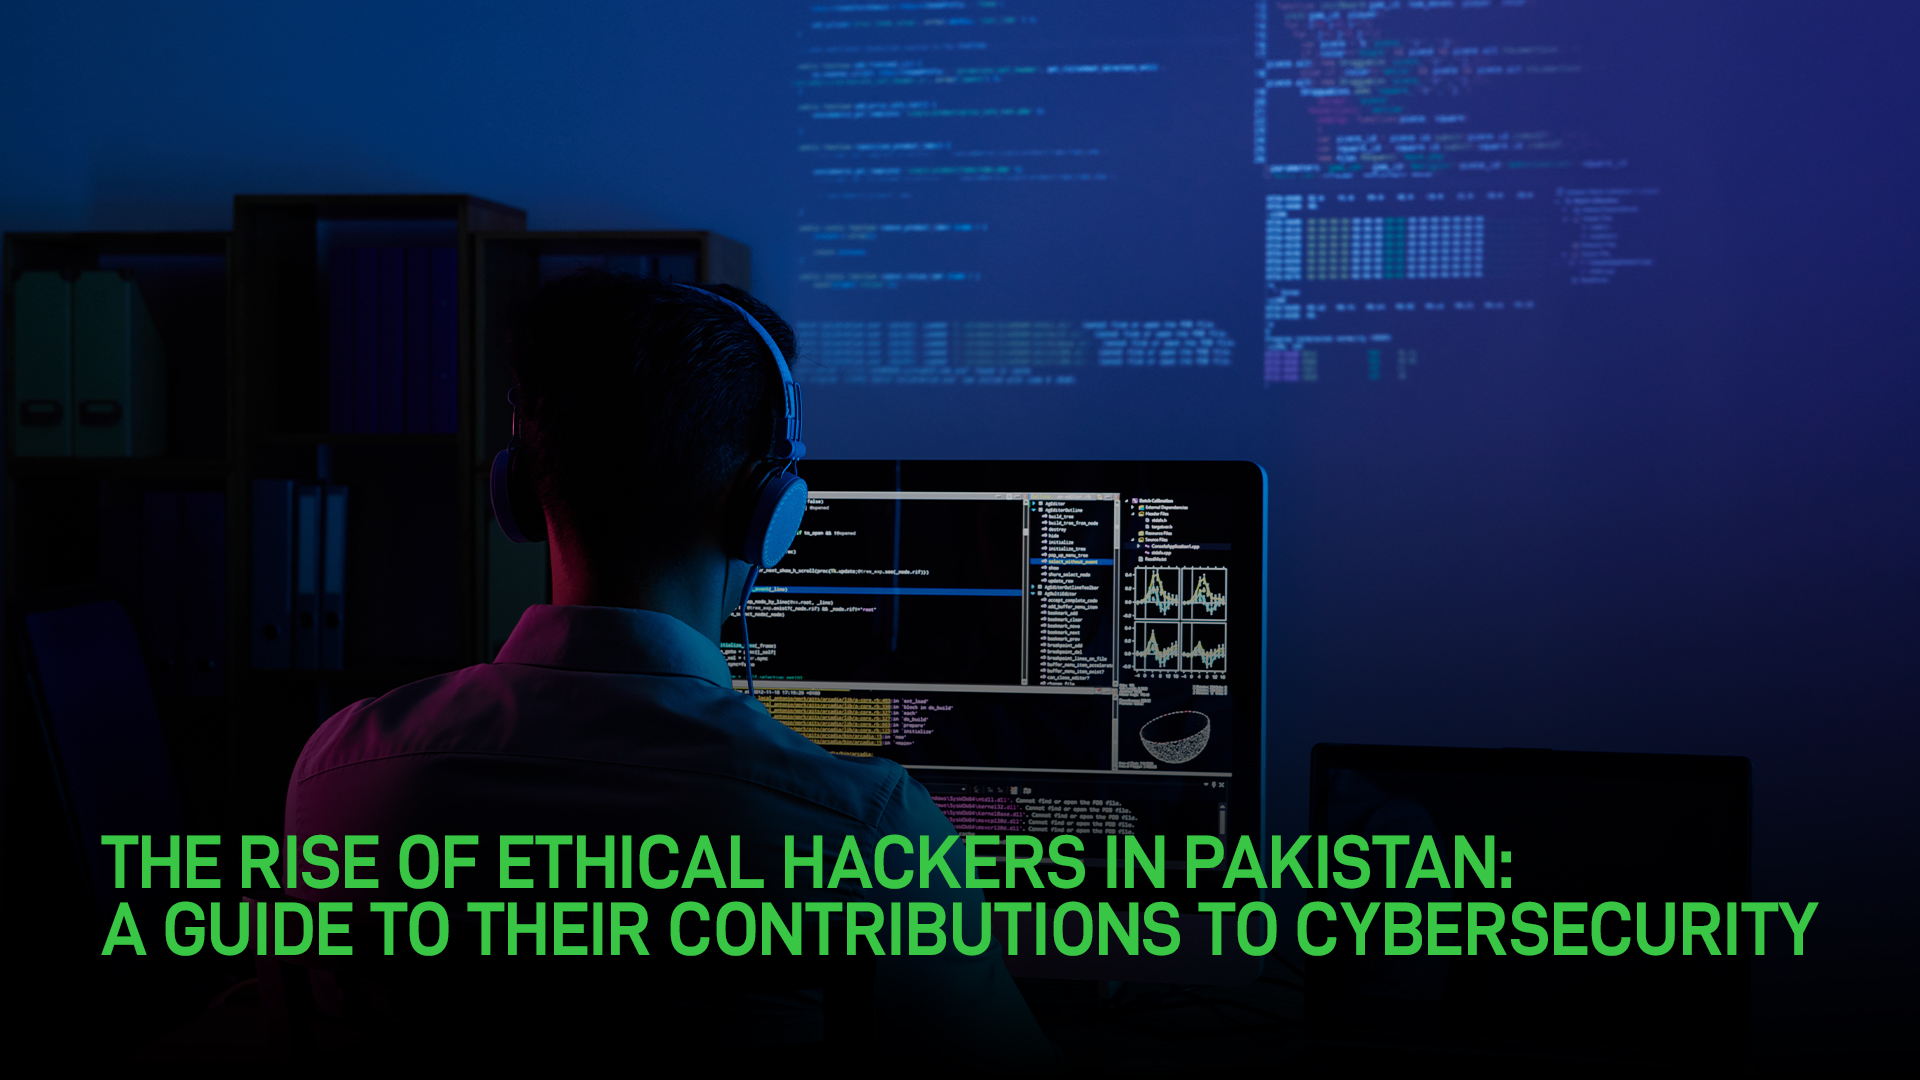 The Rise of Ethical Hackers in Pakistan: A Guide to Their Contributions to Cybersecurity